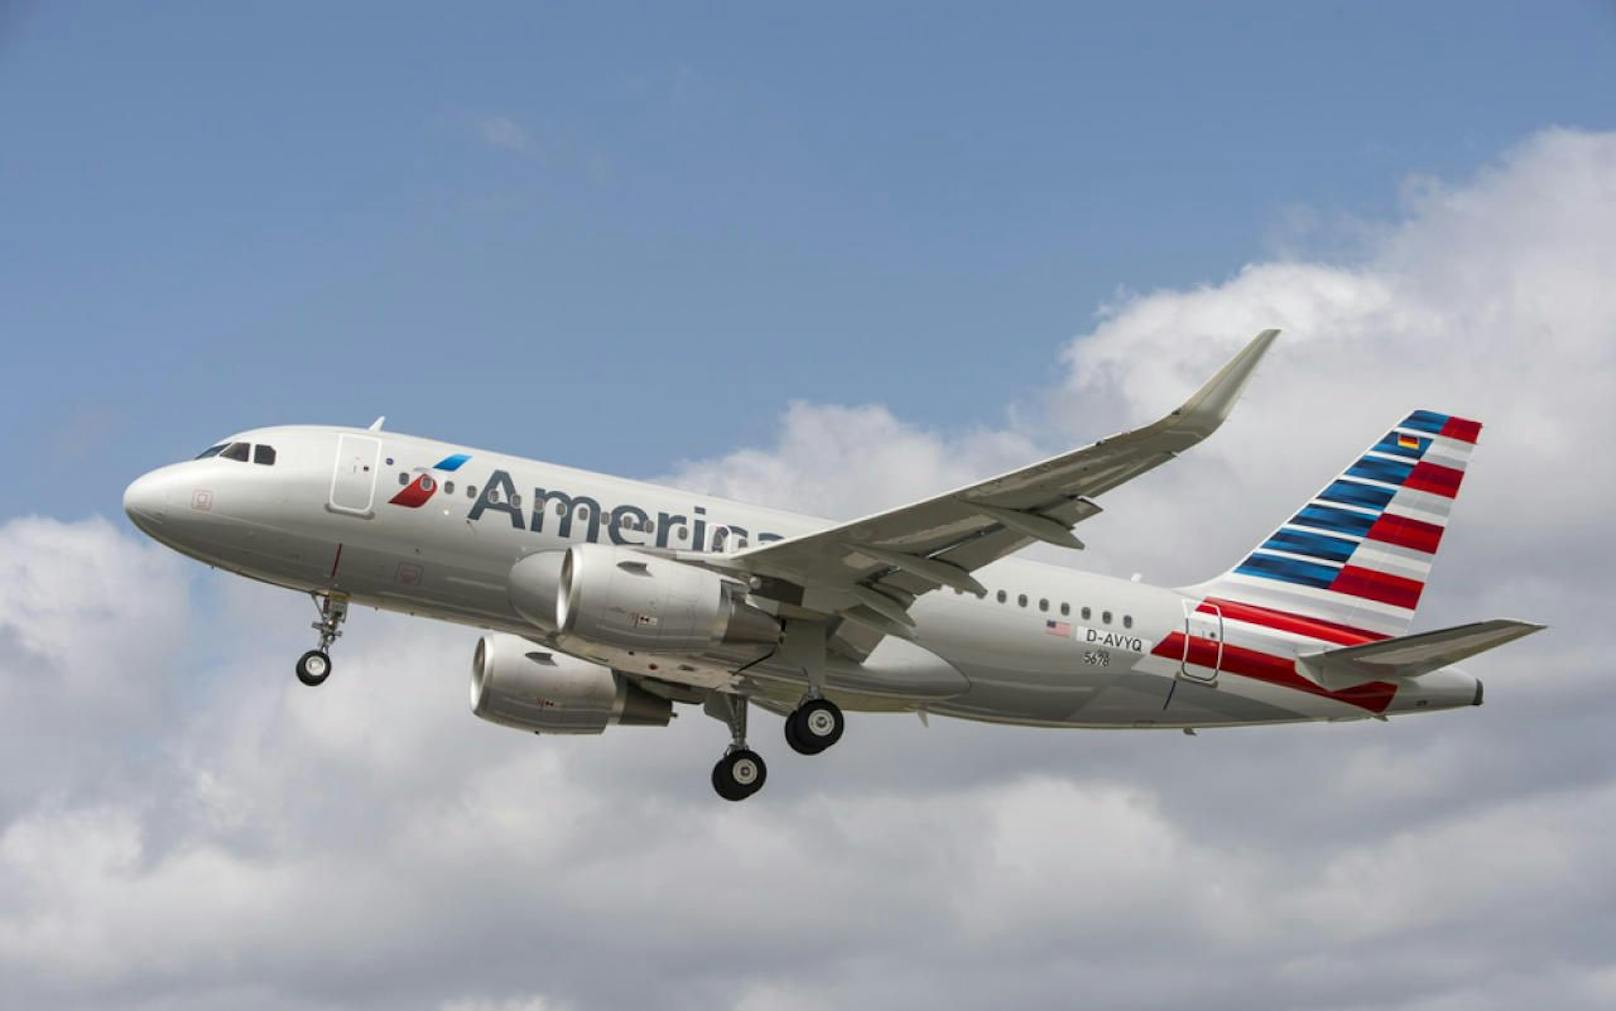 Bei den American Airlines drohen 15.000 Flugausfälle.